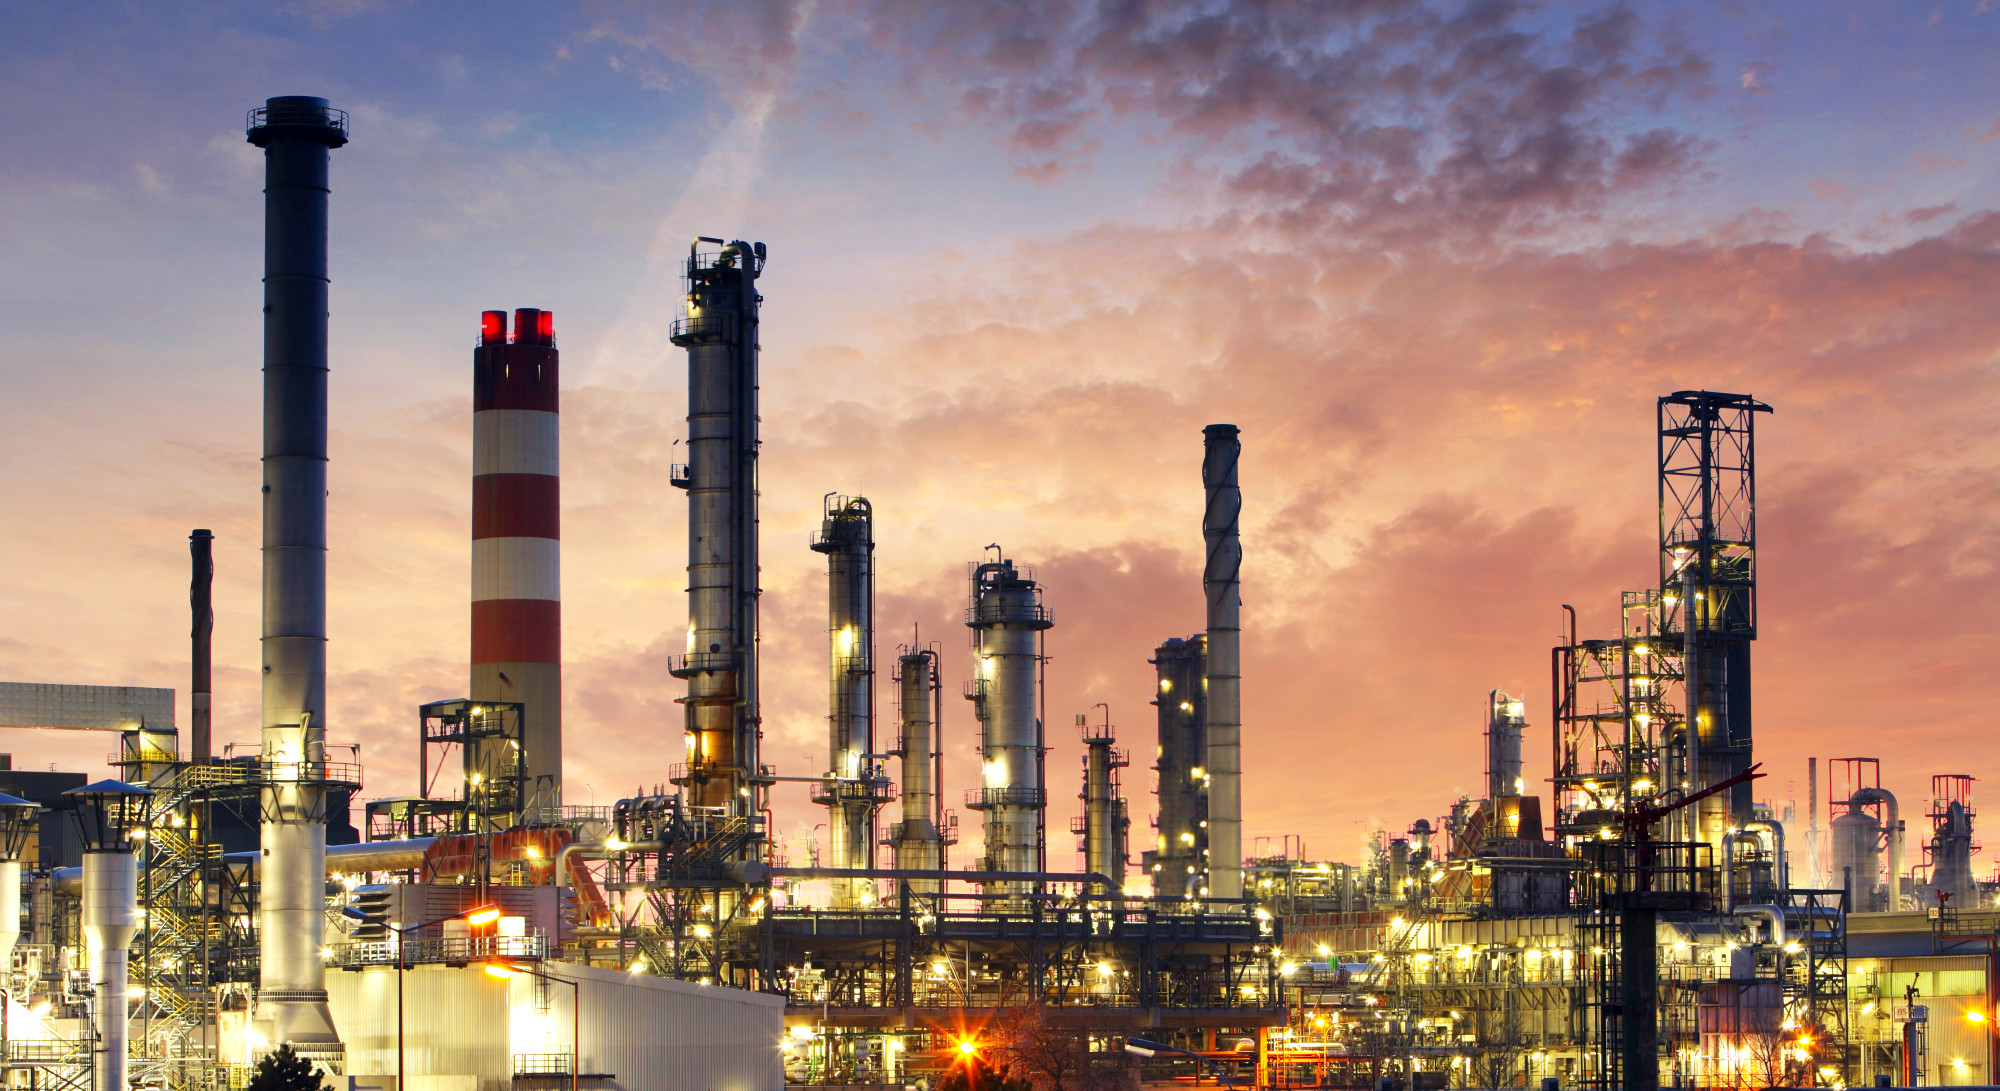 chemical industry business planning